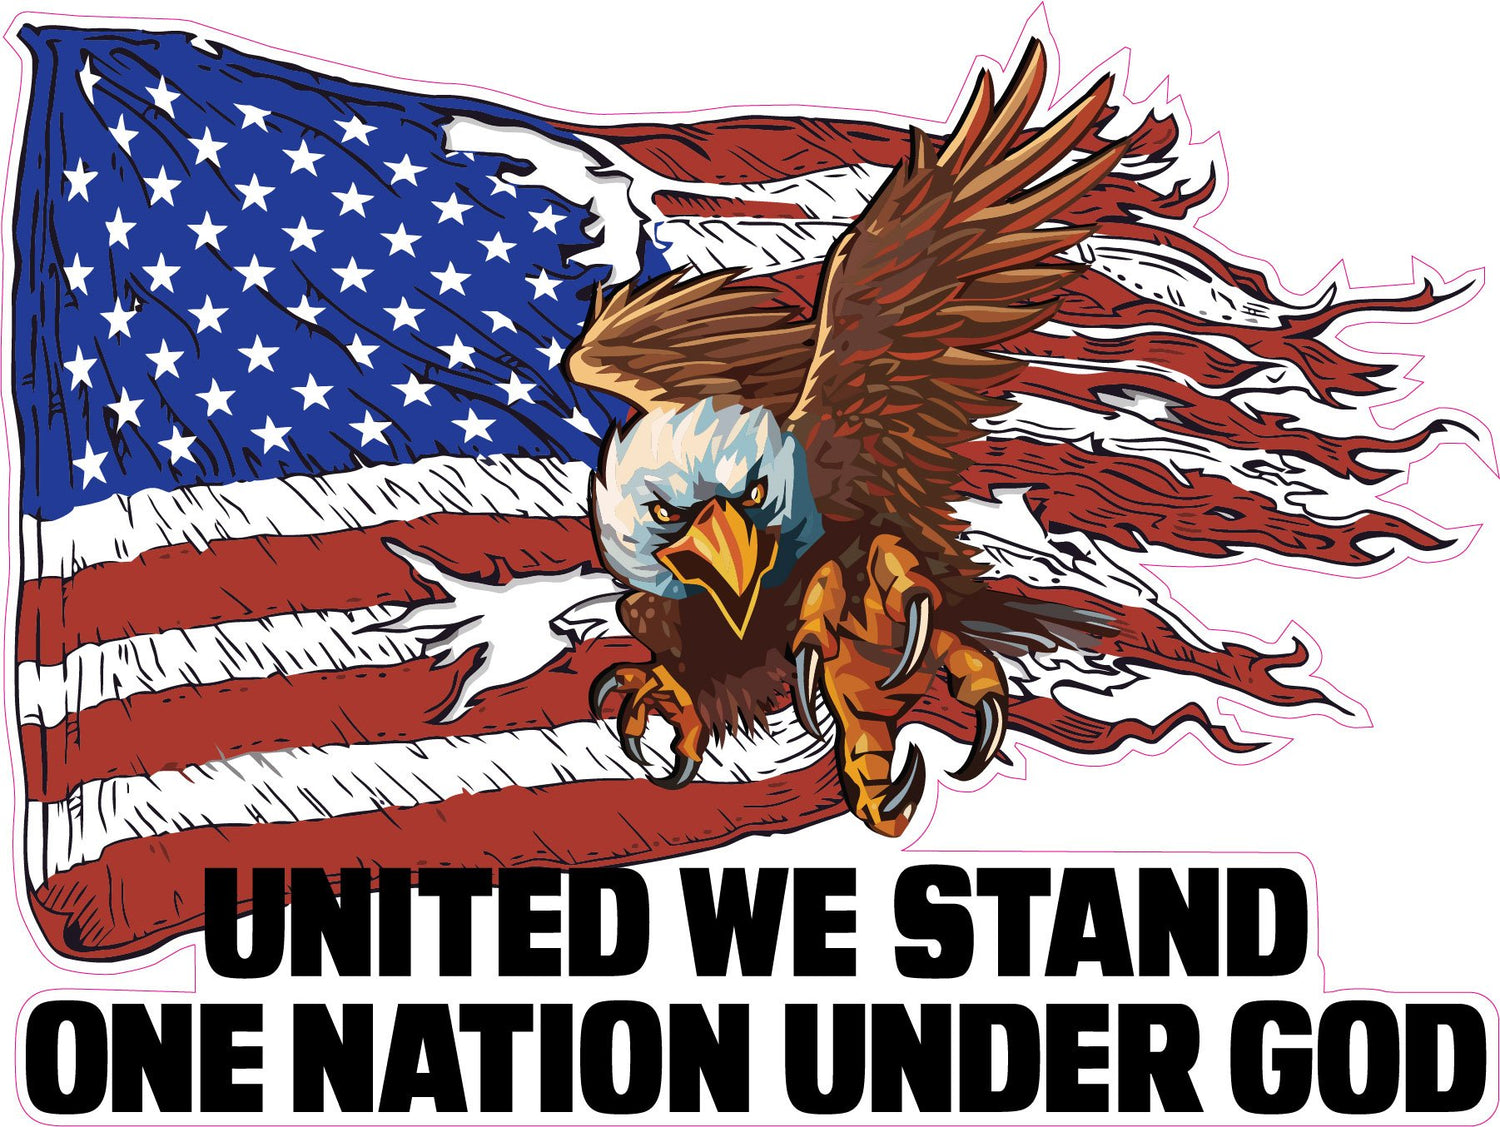 United We Stand One Nation Under God Decal - American Bald Eagle, American bald eagle decal, American eagle, American Eagle American Flag Decal, American flag, American flag decals, American flag eagle decals, American flag stickers, automotive decals, automotive stickers, decals, eagle decals, eagle stickers, i stand for the flag, Military decals, one nation under god, Patriotic stickers, United WE Stand Decal, United We Stand One Nation Under God Decal, United We Stand Sticker, vehicle decals,